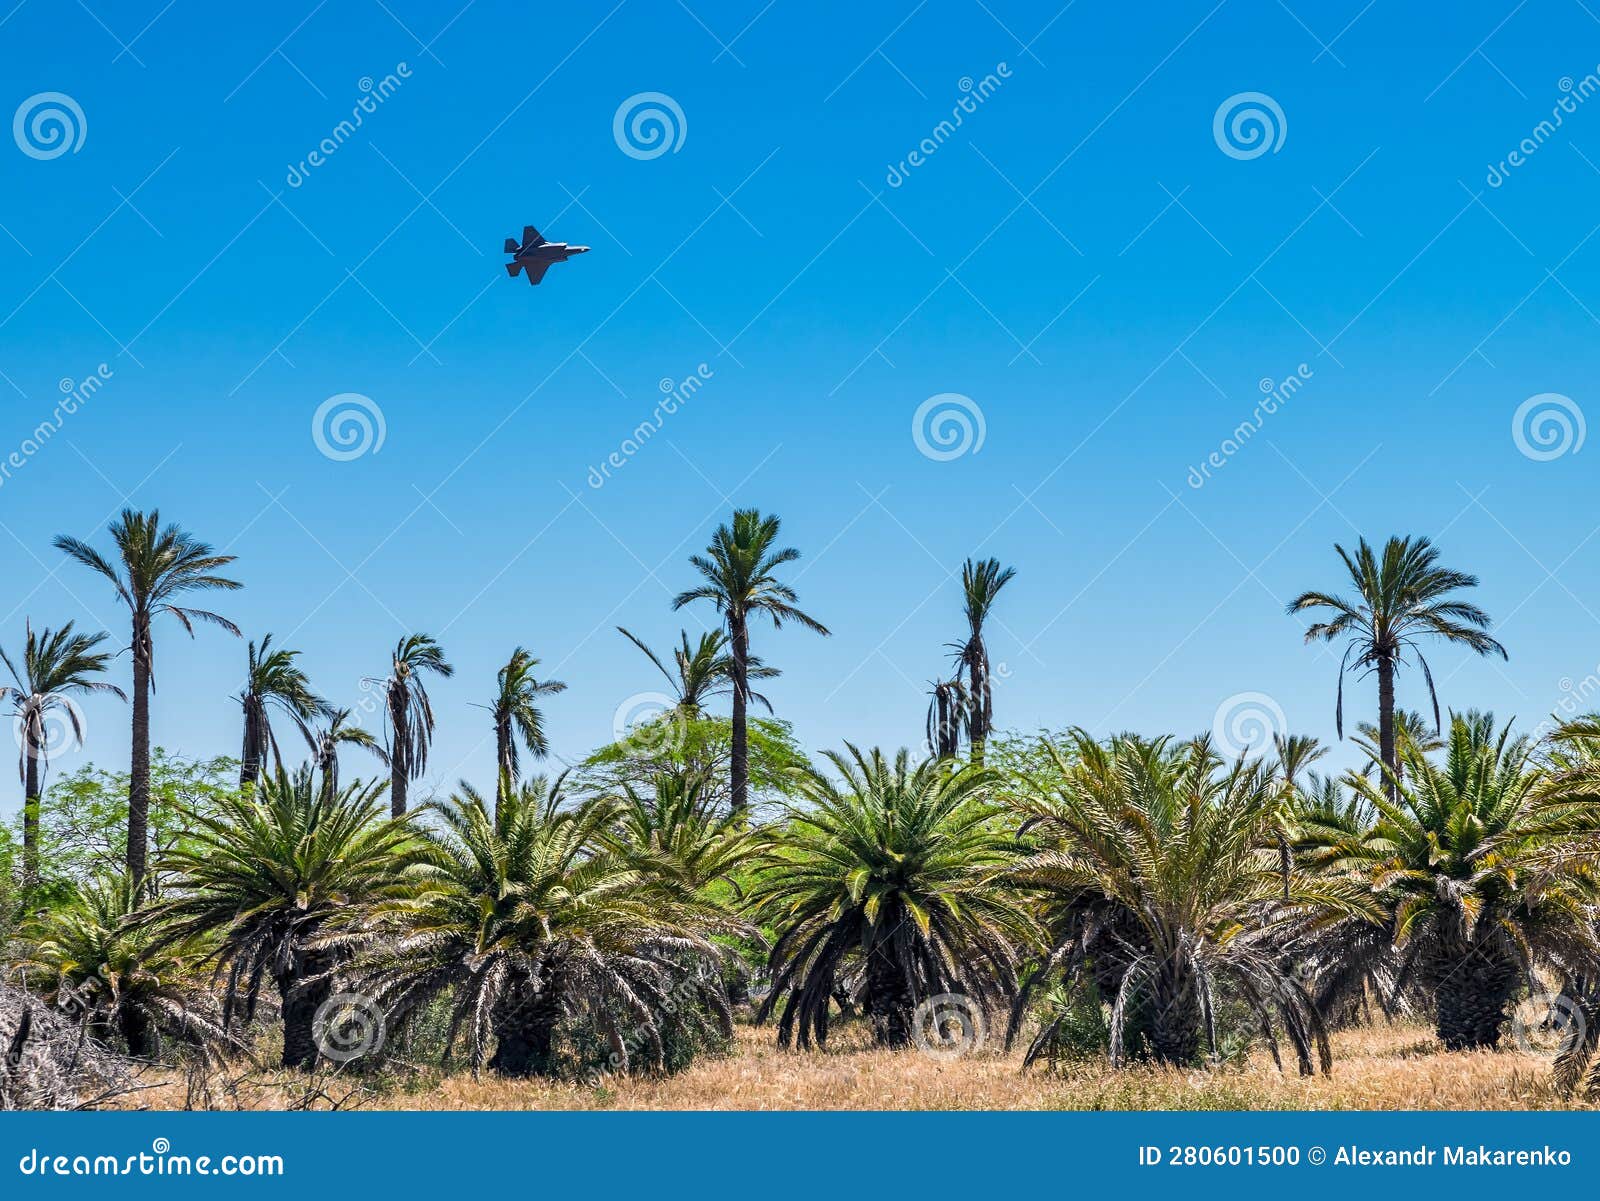 airplane f 35 adir flying over palm trees in israel